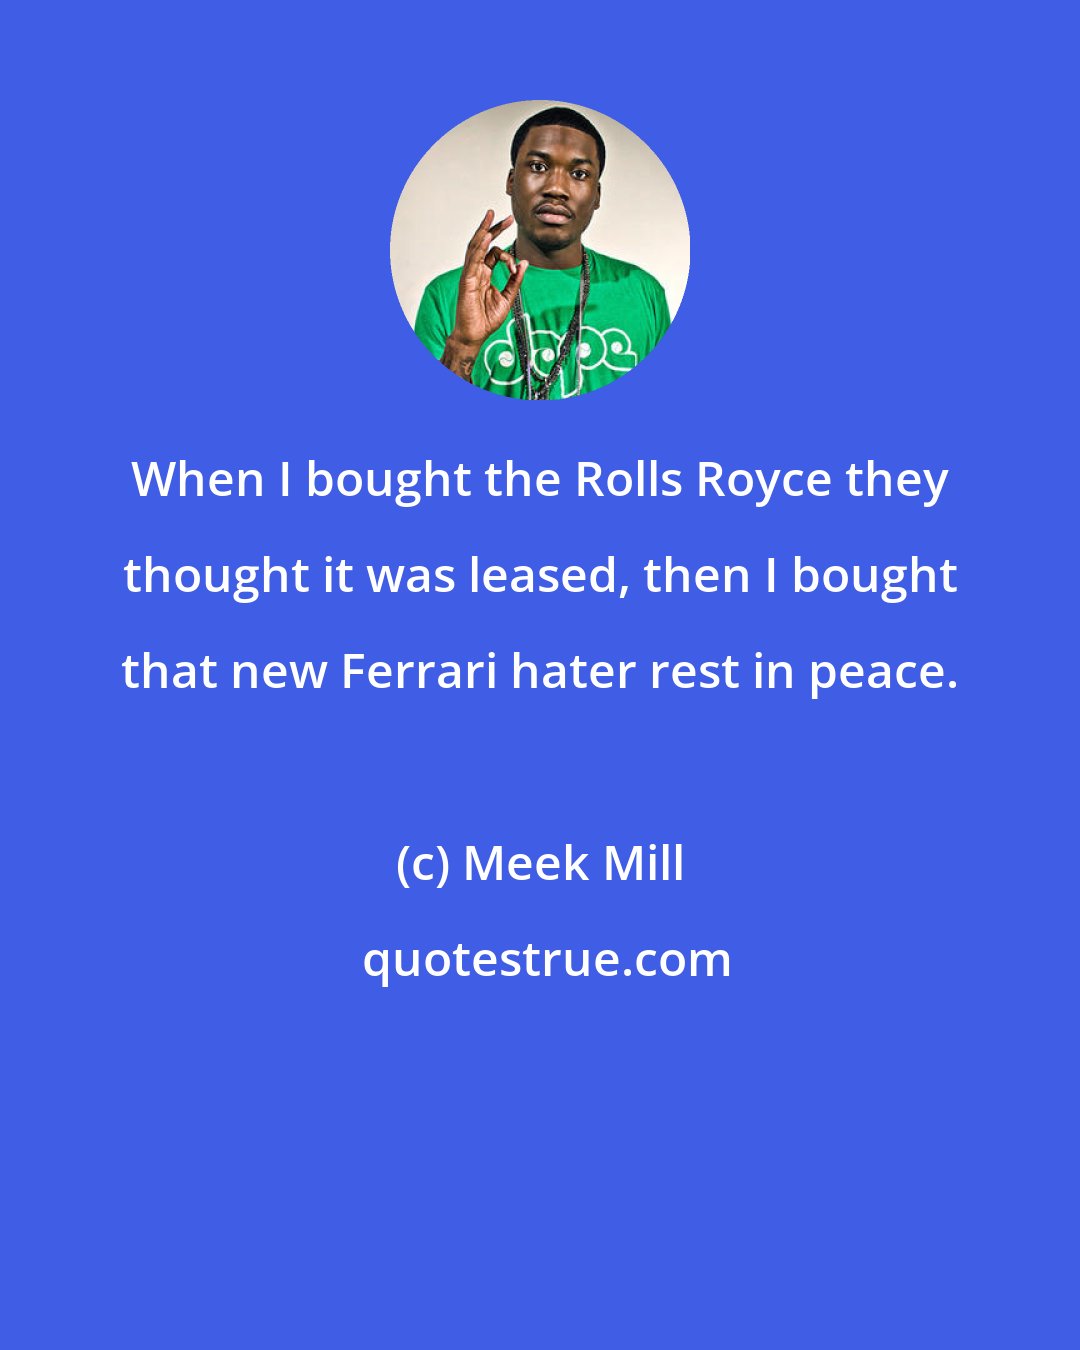 Meek Mill: When I bought the Rolls Royce they thought it was leased, then I bought that new Ferrari hater rest in peace.